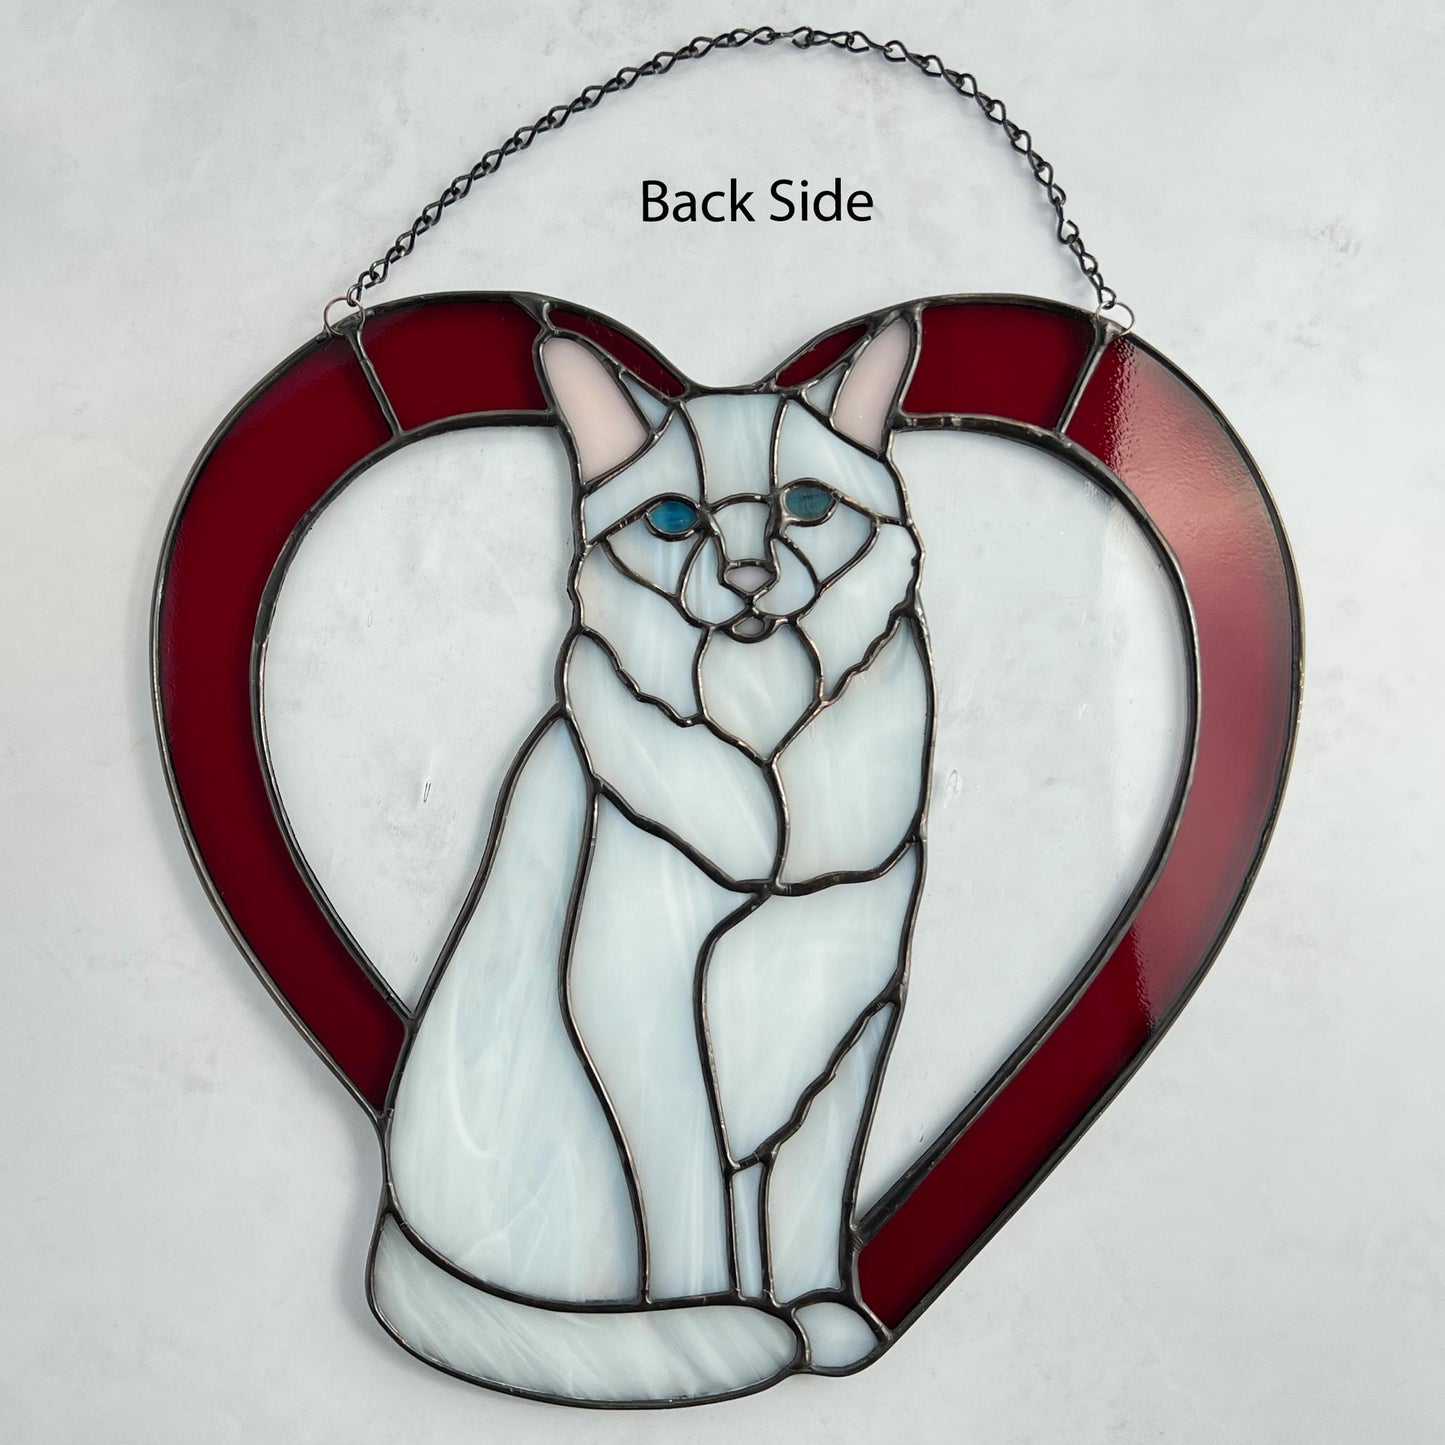 An all white stained glass sitting cat surrounded by a red heart. The glass used for the white fur is textured to resemble real fur and the eyes are an iridescent blue.  Light pink is used for the inner ear and the nose. A clear rainy glass is used between the cat and the heart for stability. This picture shows the back side of the cat on a white background.